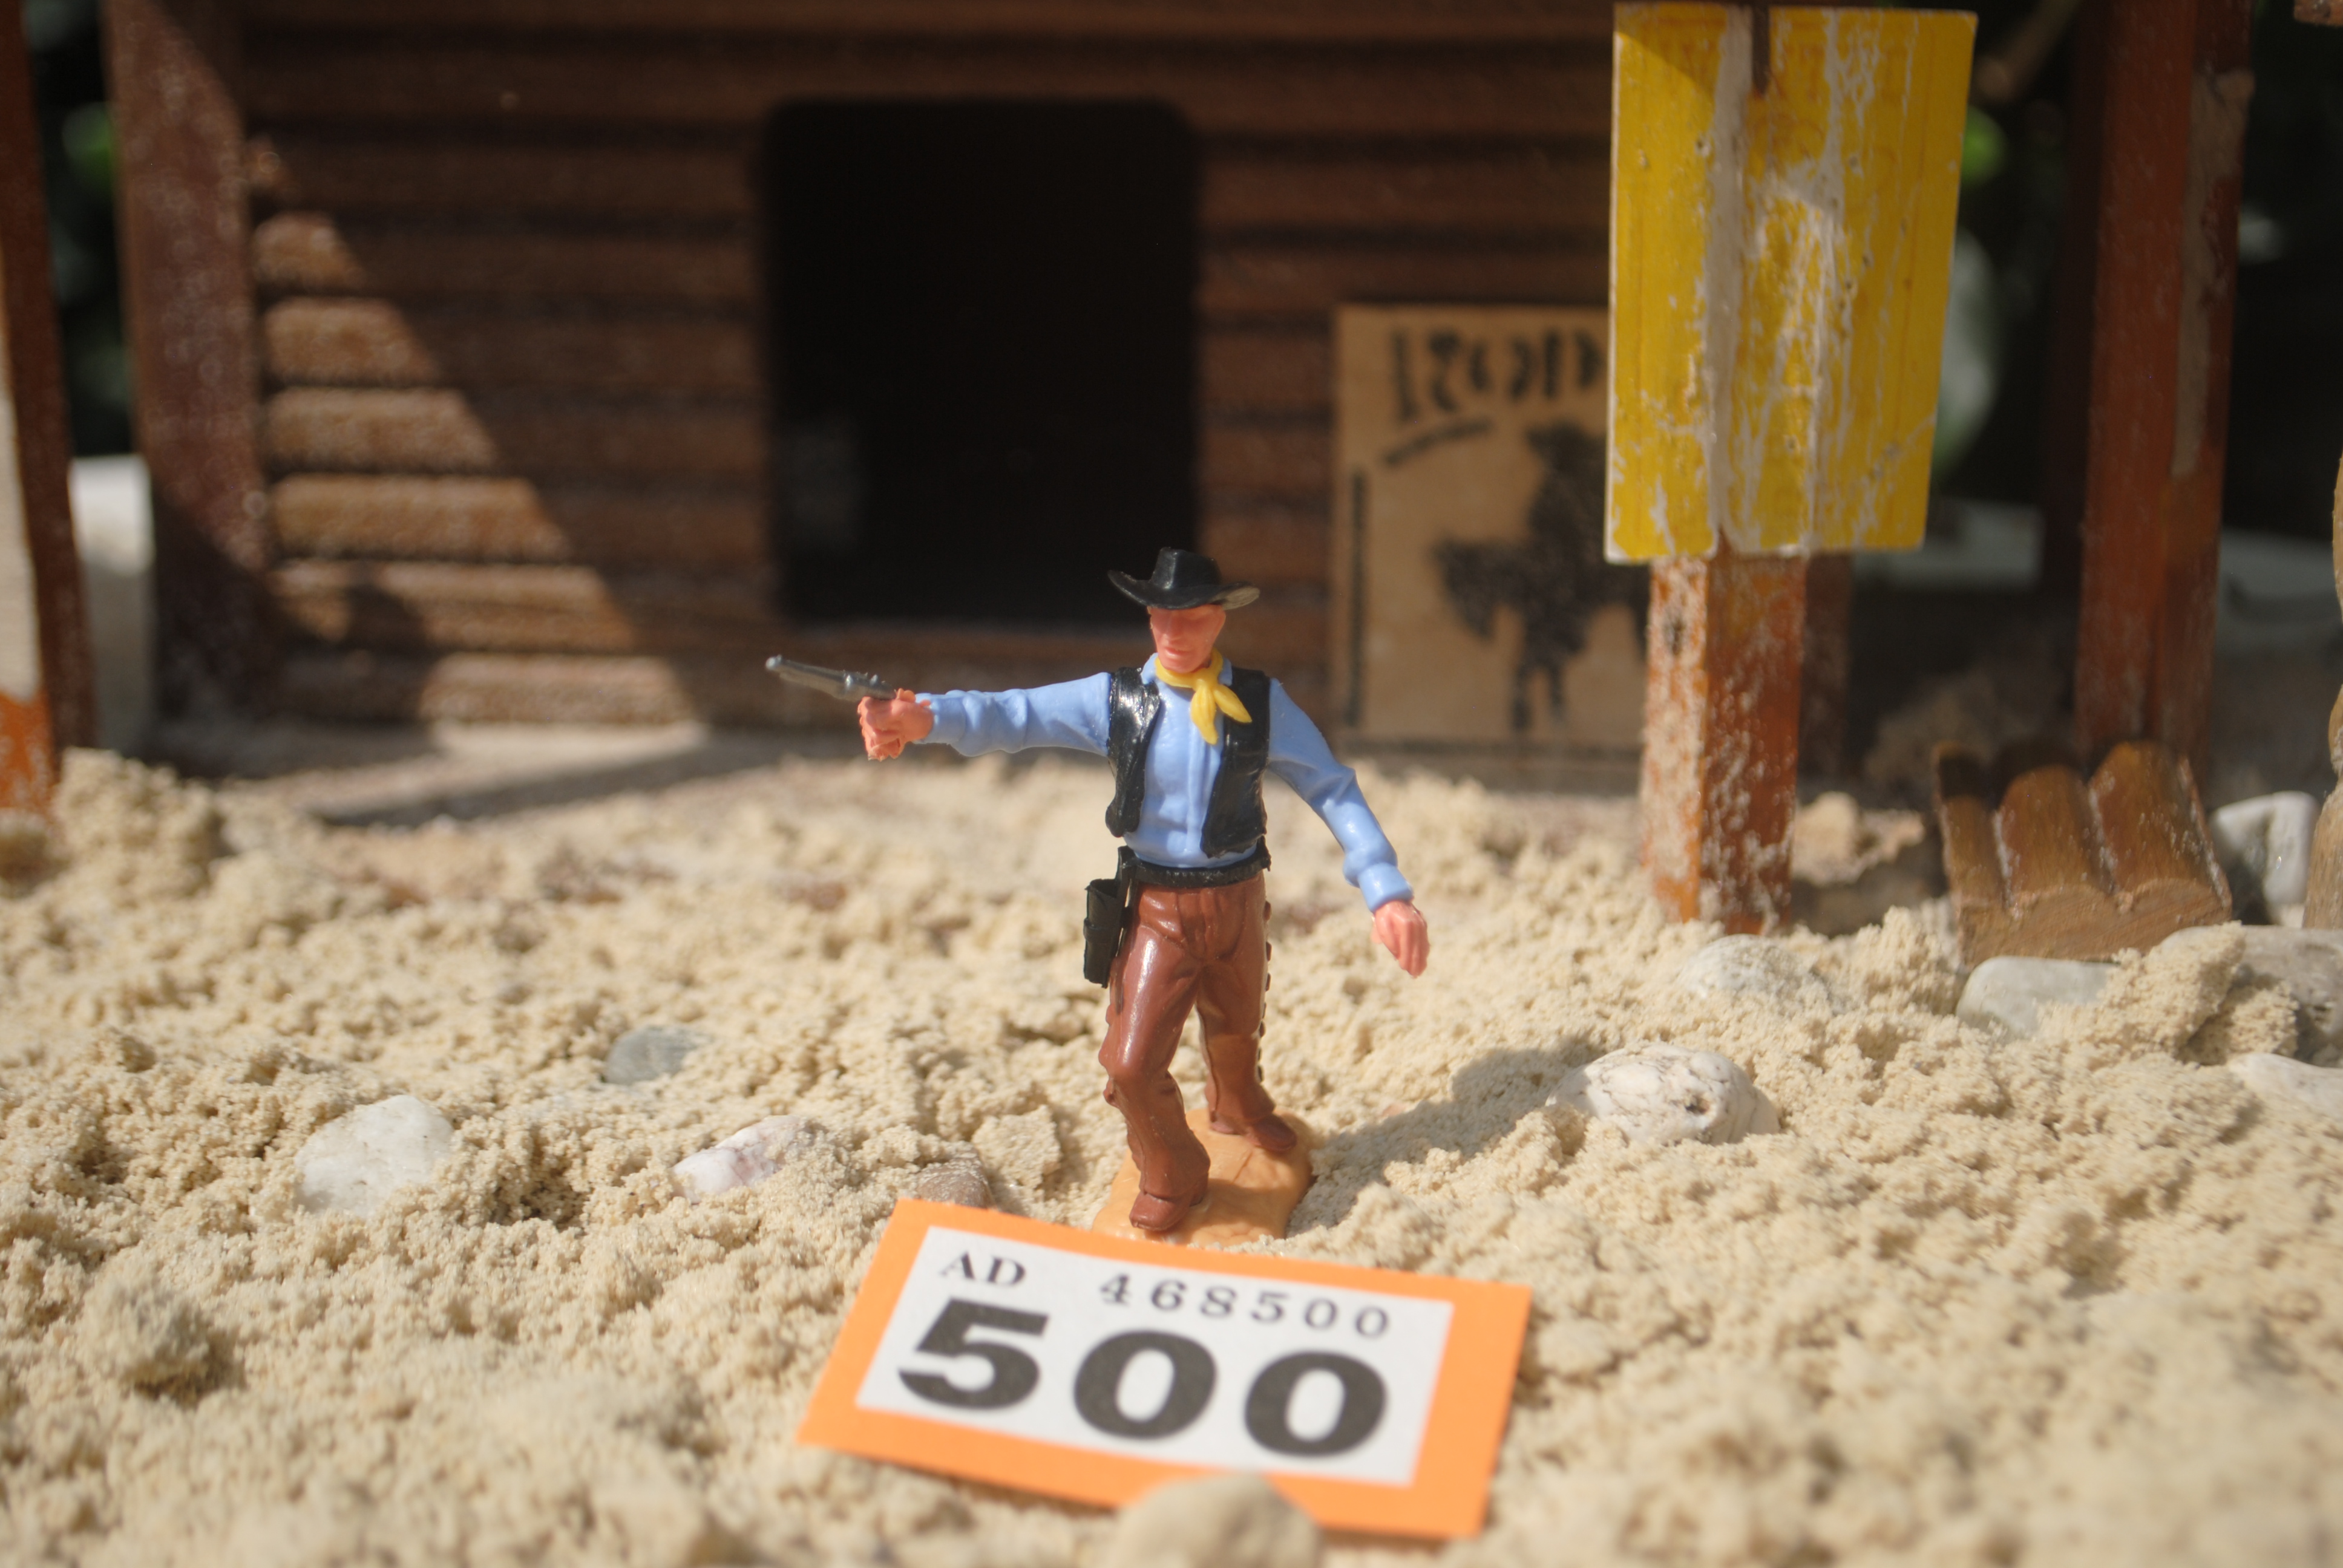 Timpo Toys O.500 Cowboy Standing 2nd version